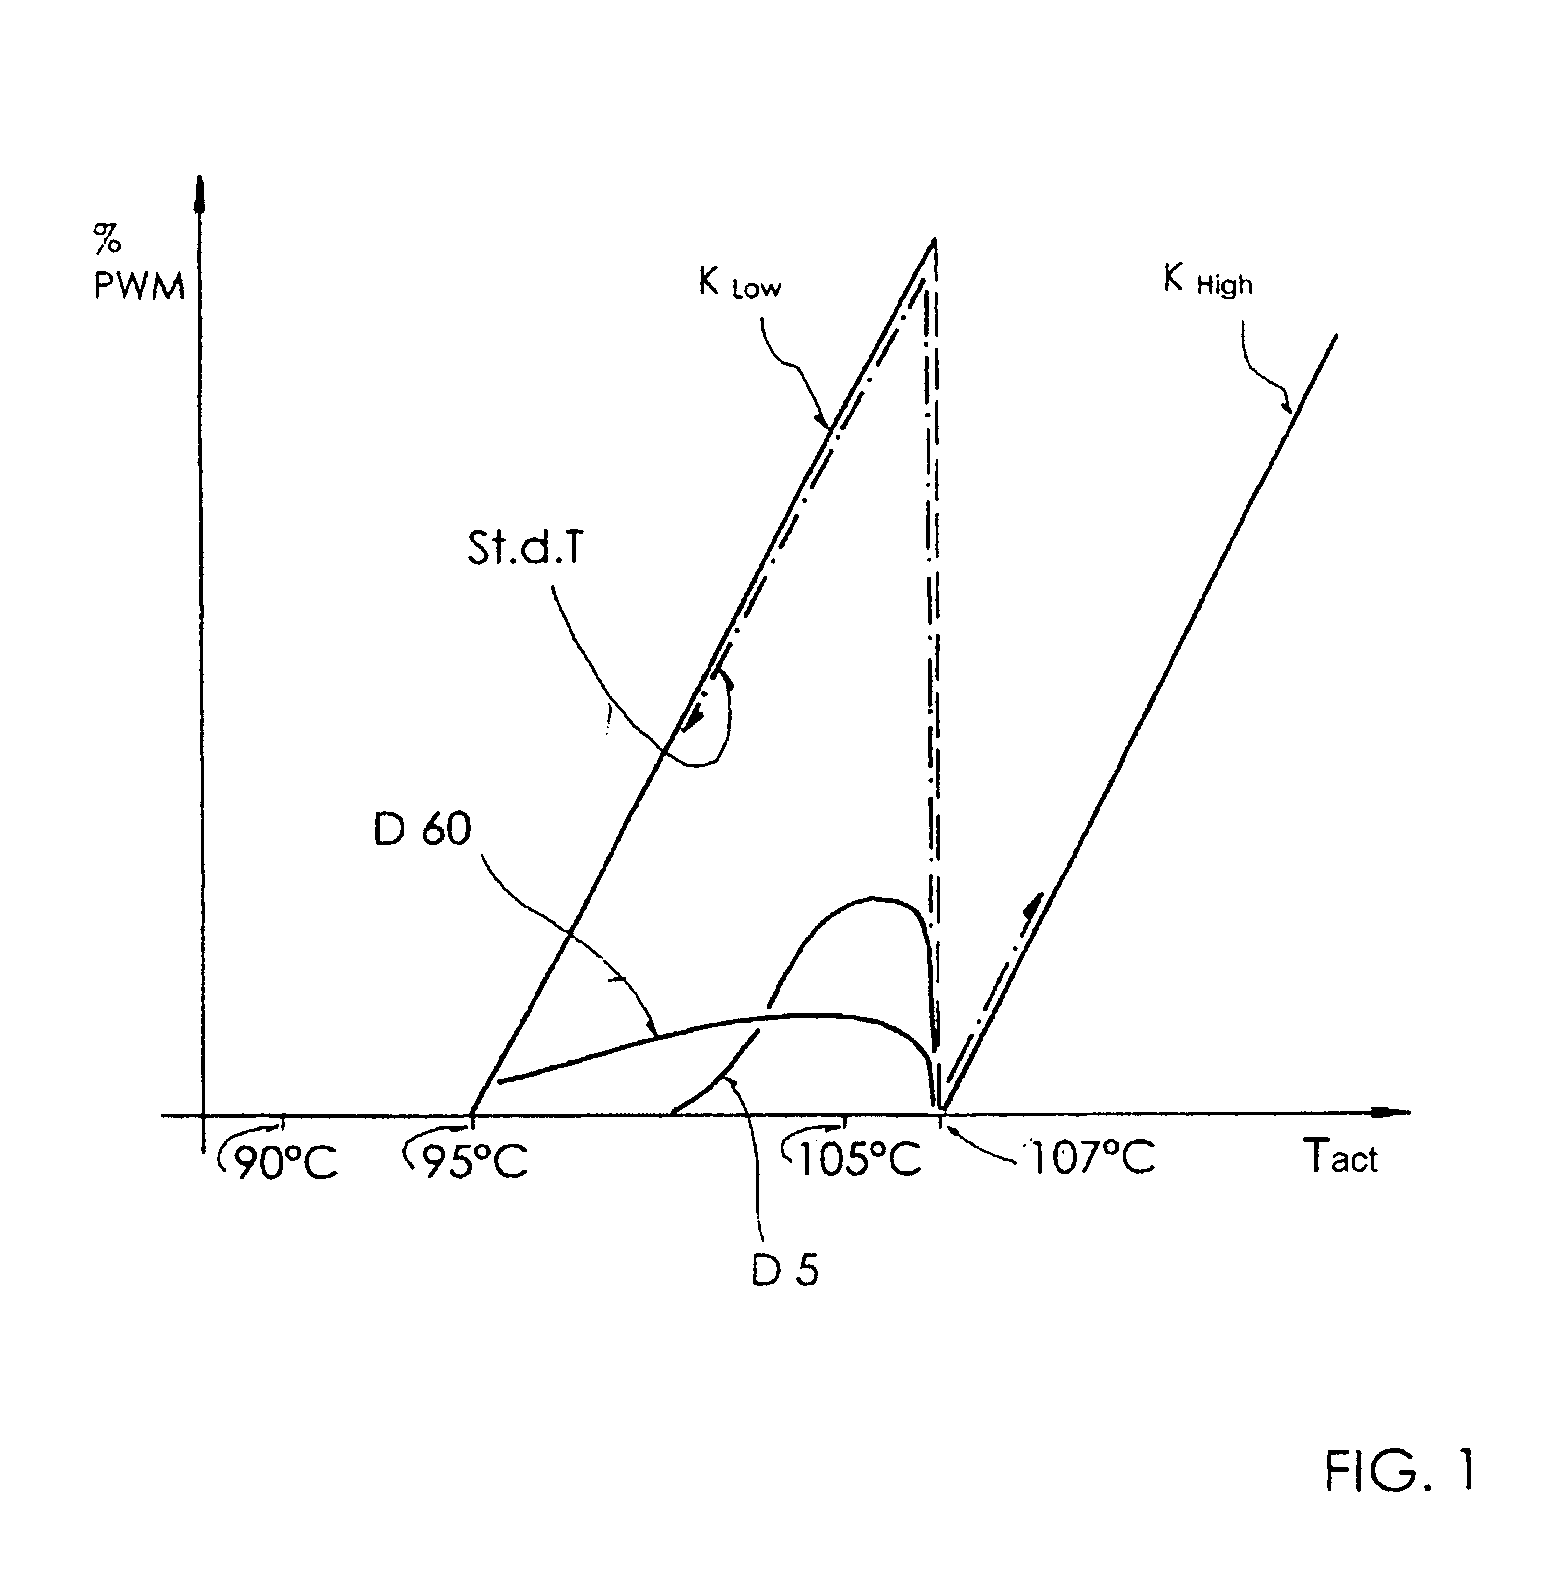 Method for actuating a fan using a plurality of characteristic curves and a control program for controlling the power of the fan